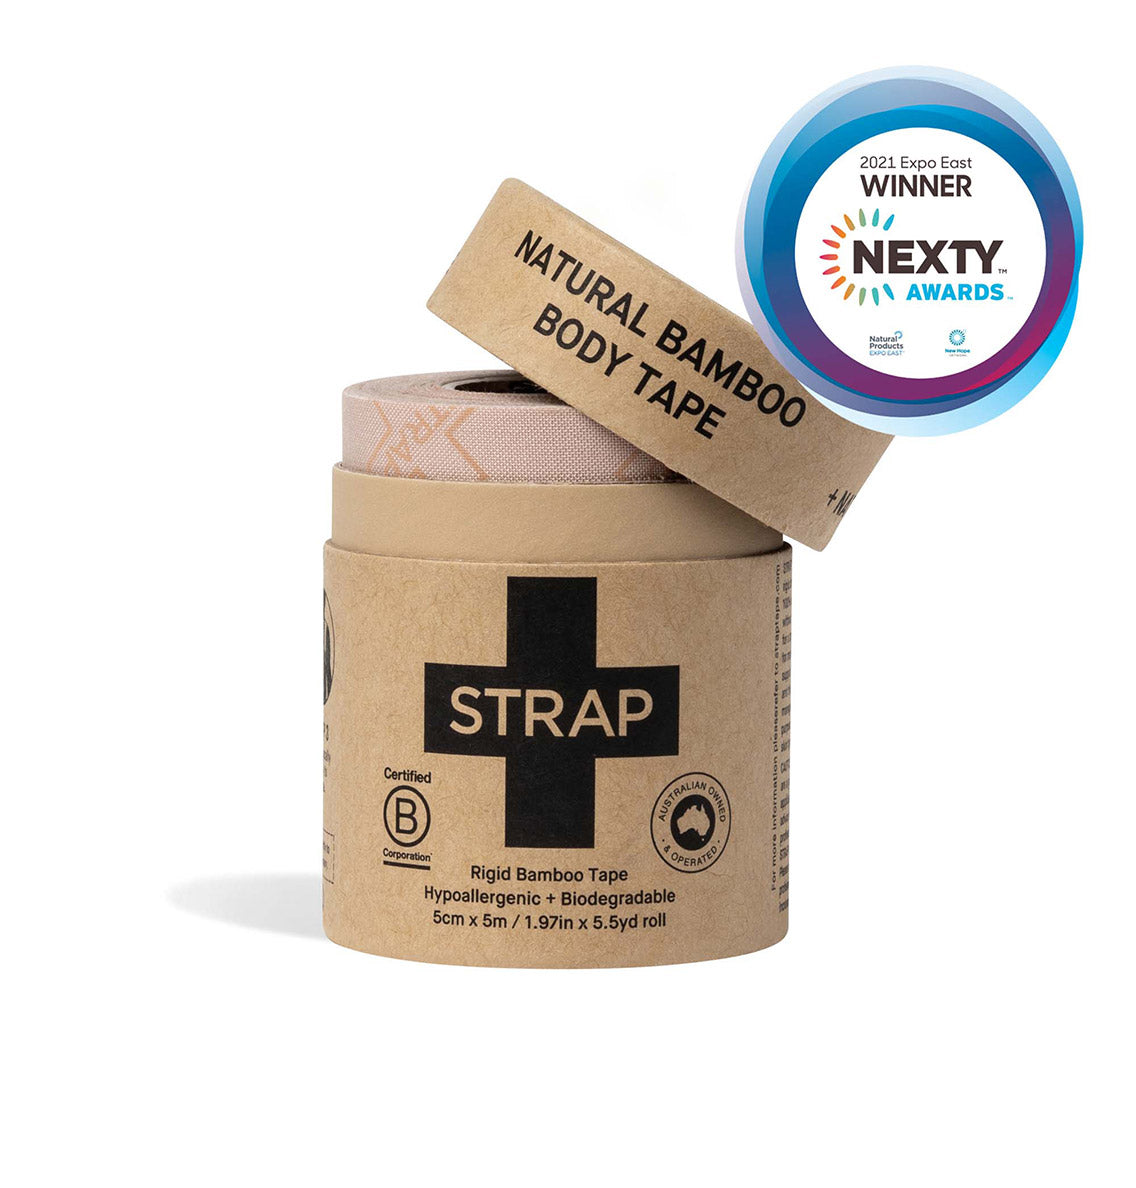 STRAP Natural Bamboo Body Tape - 5m